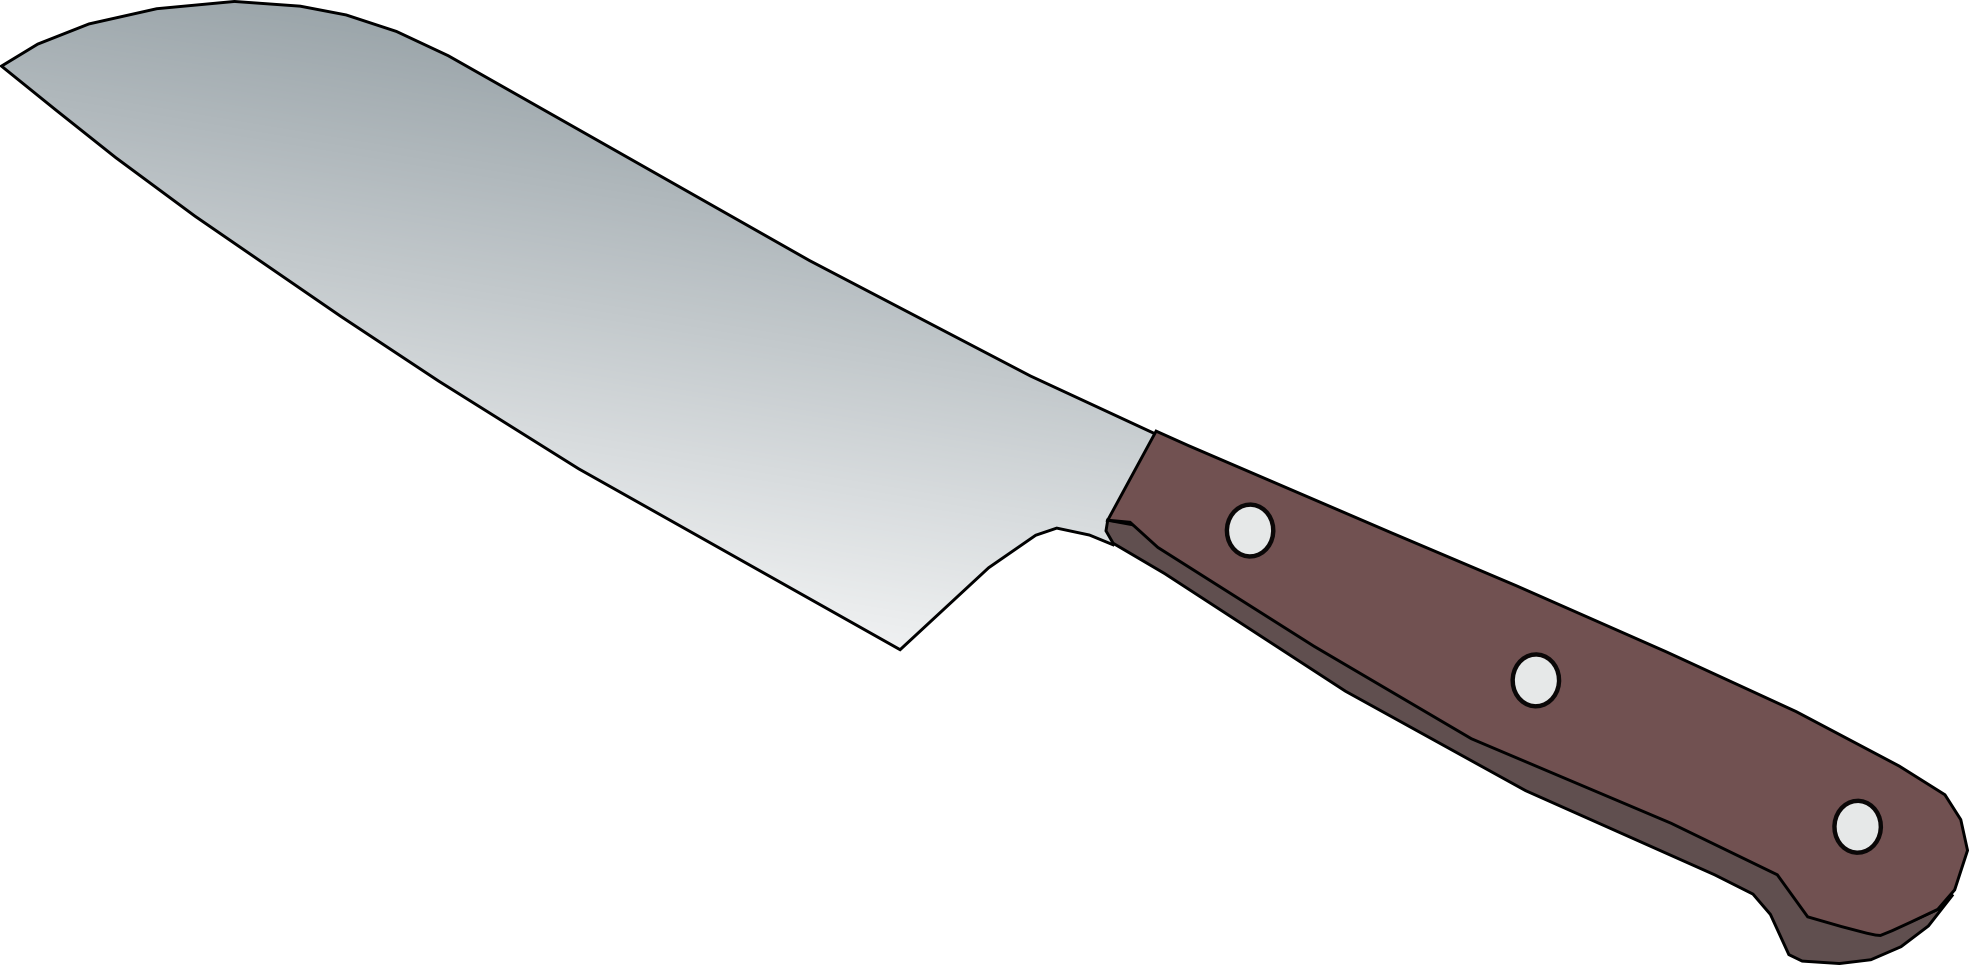 Knife image clipart